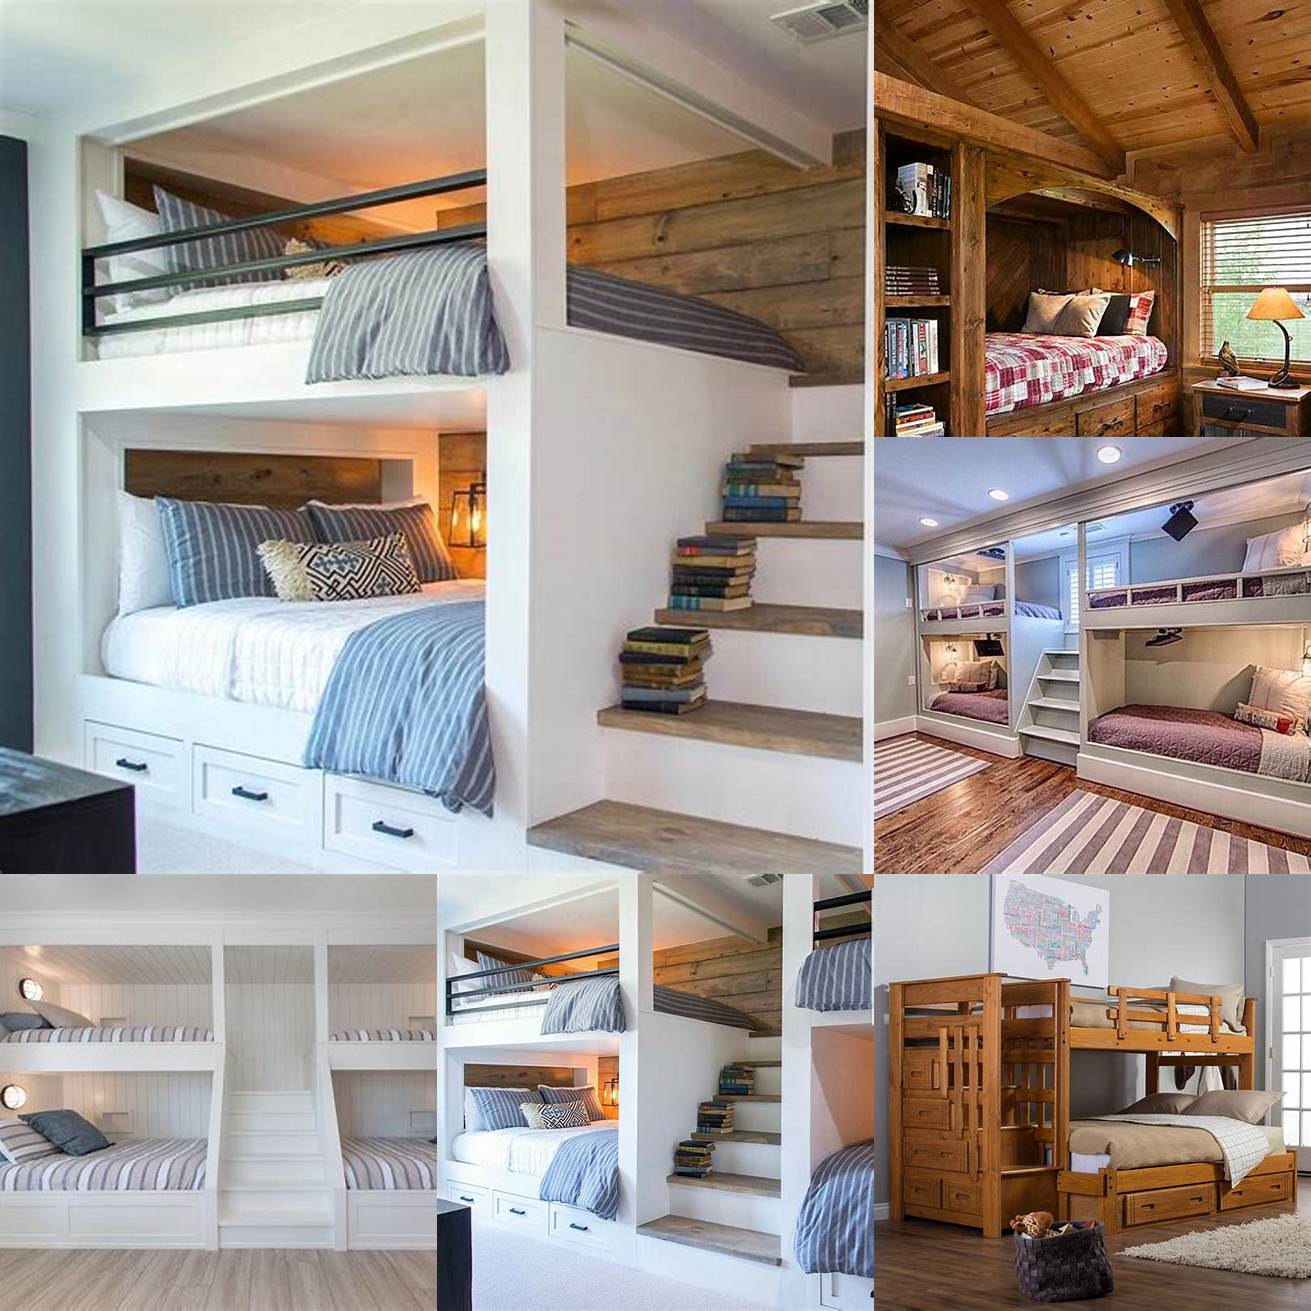 Bunk beds with built-in storage